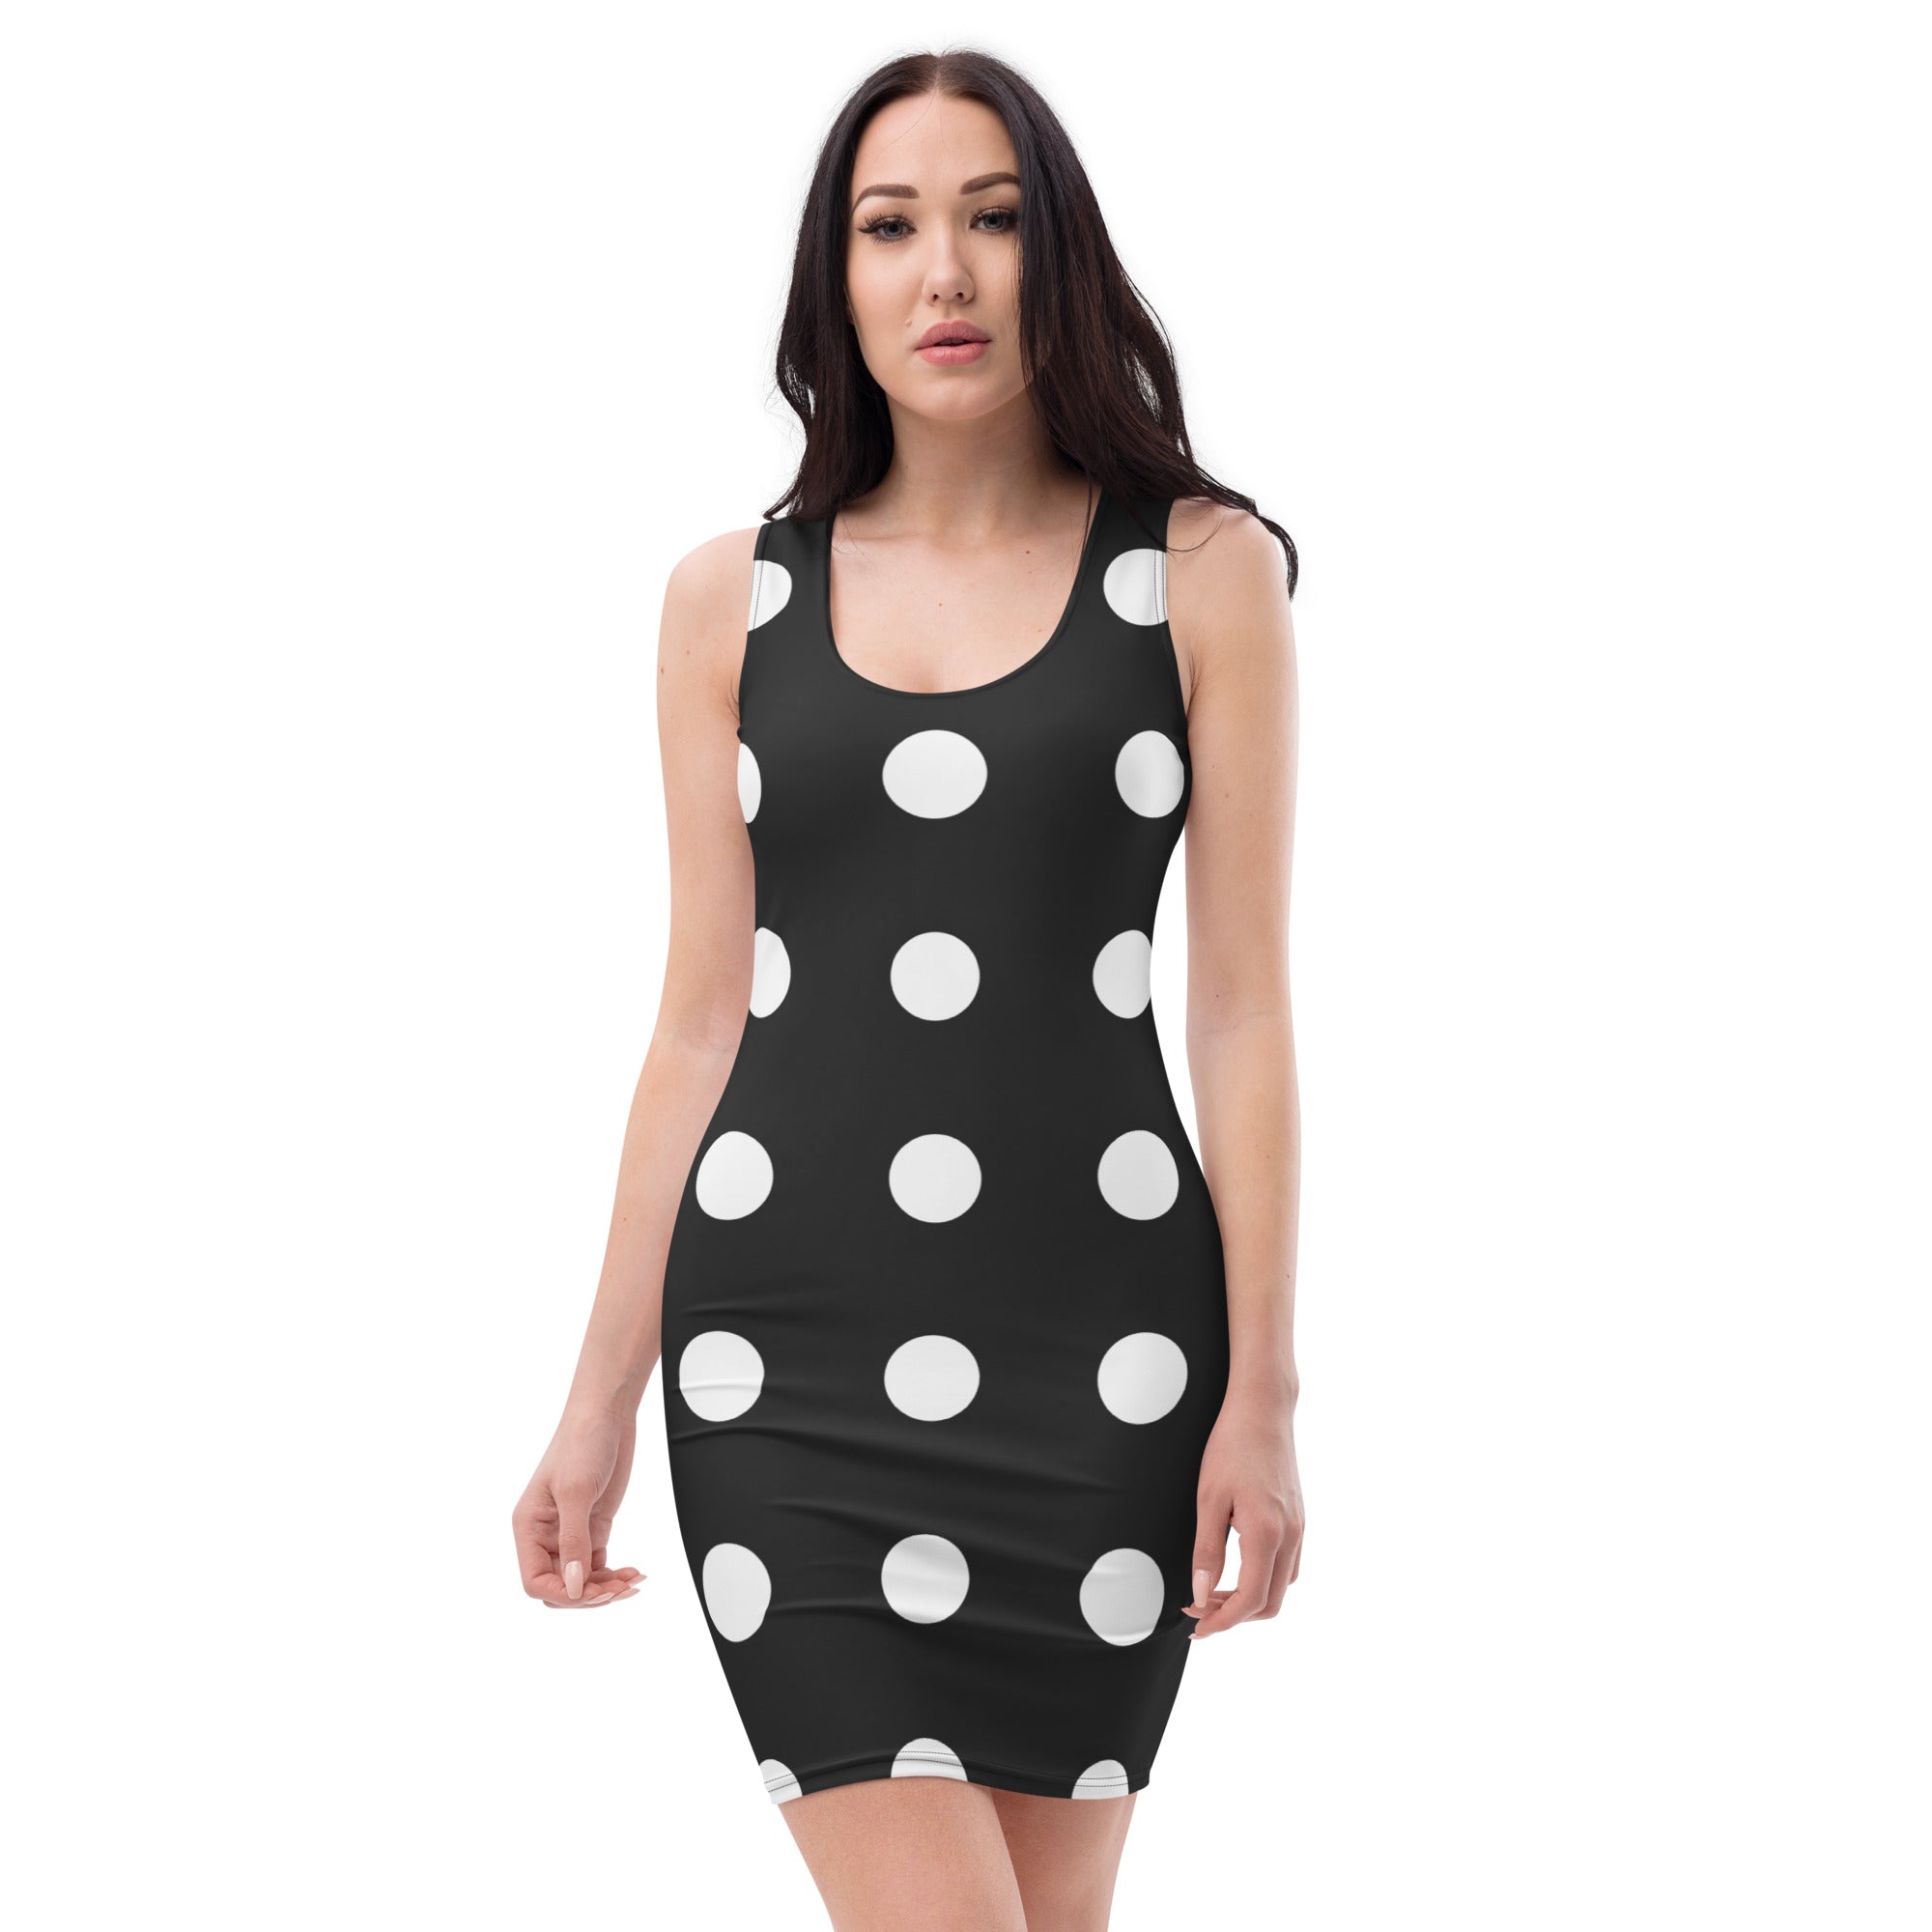 "Timeless Elegance: Black and White Polka Dot Fitted Dress", lioness-love